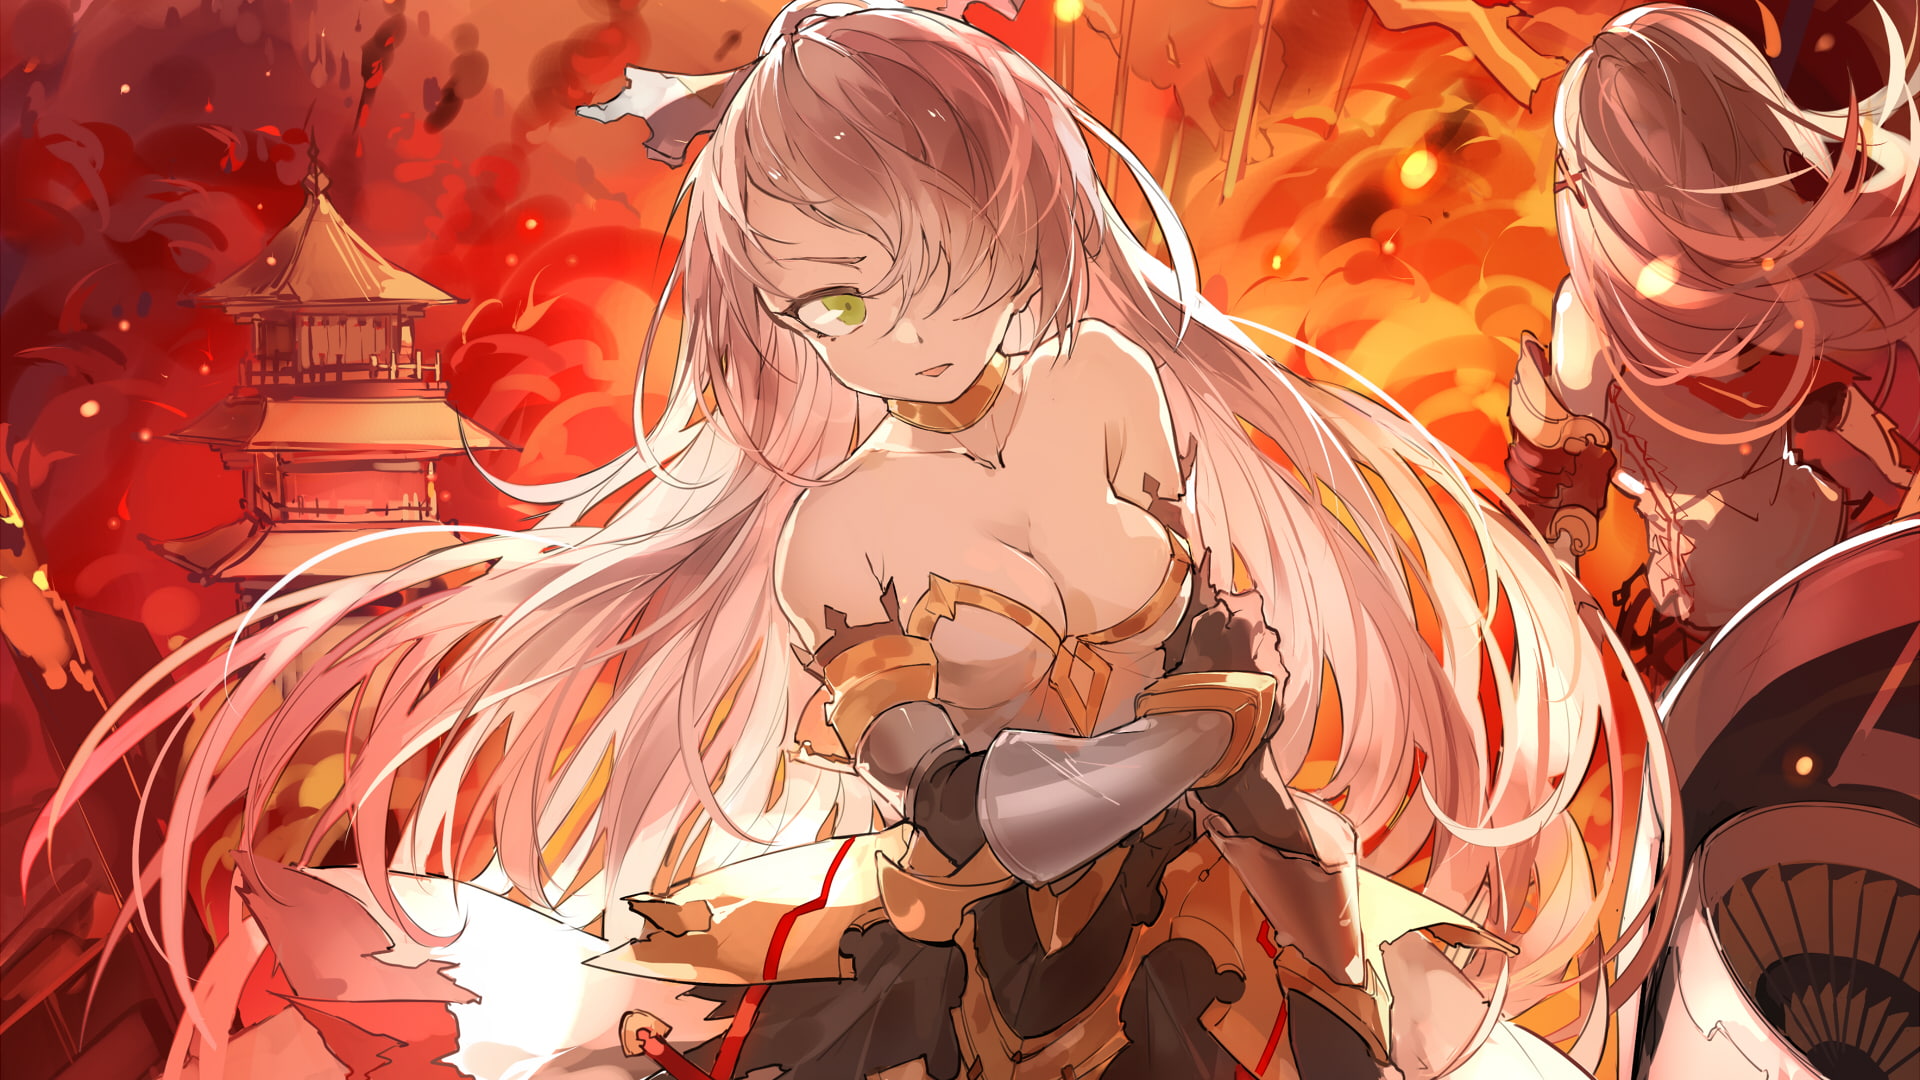 anime, anime girls, green eyes, fire, red flame, city, armor